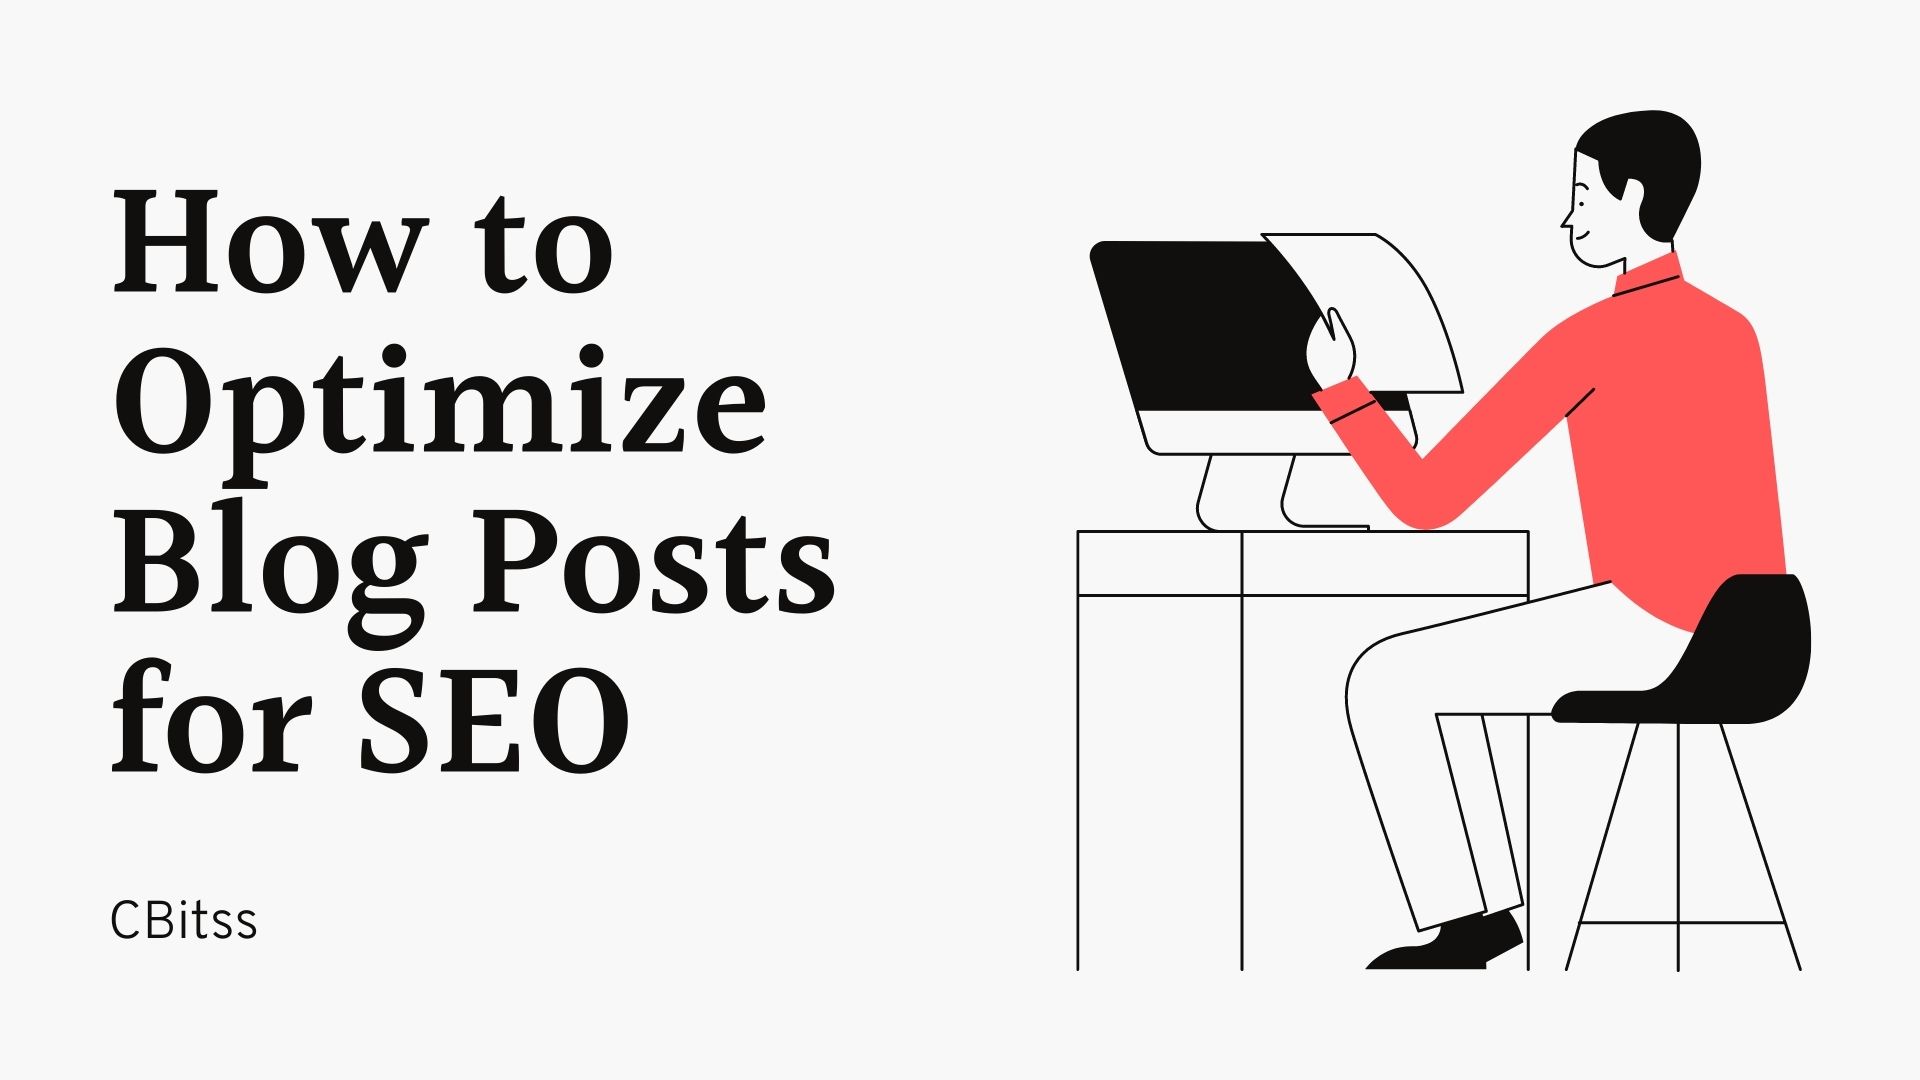 How to Optimize Blog Posts for SEO